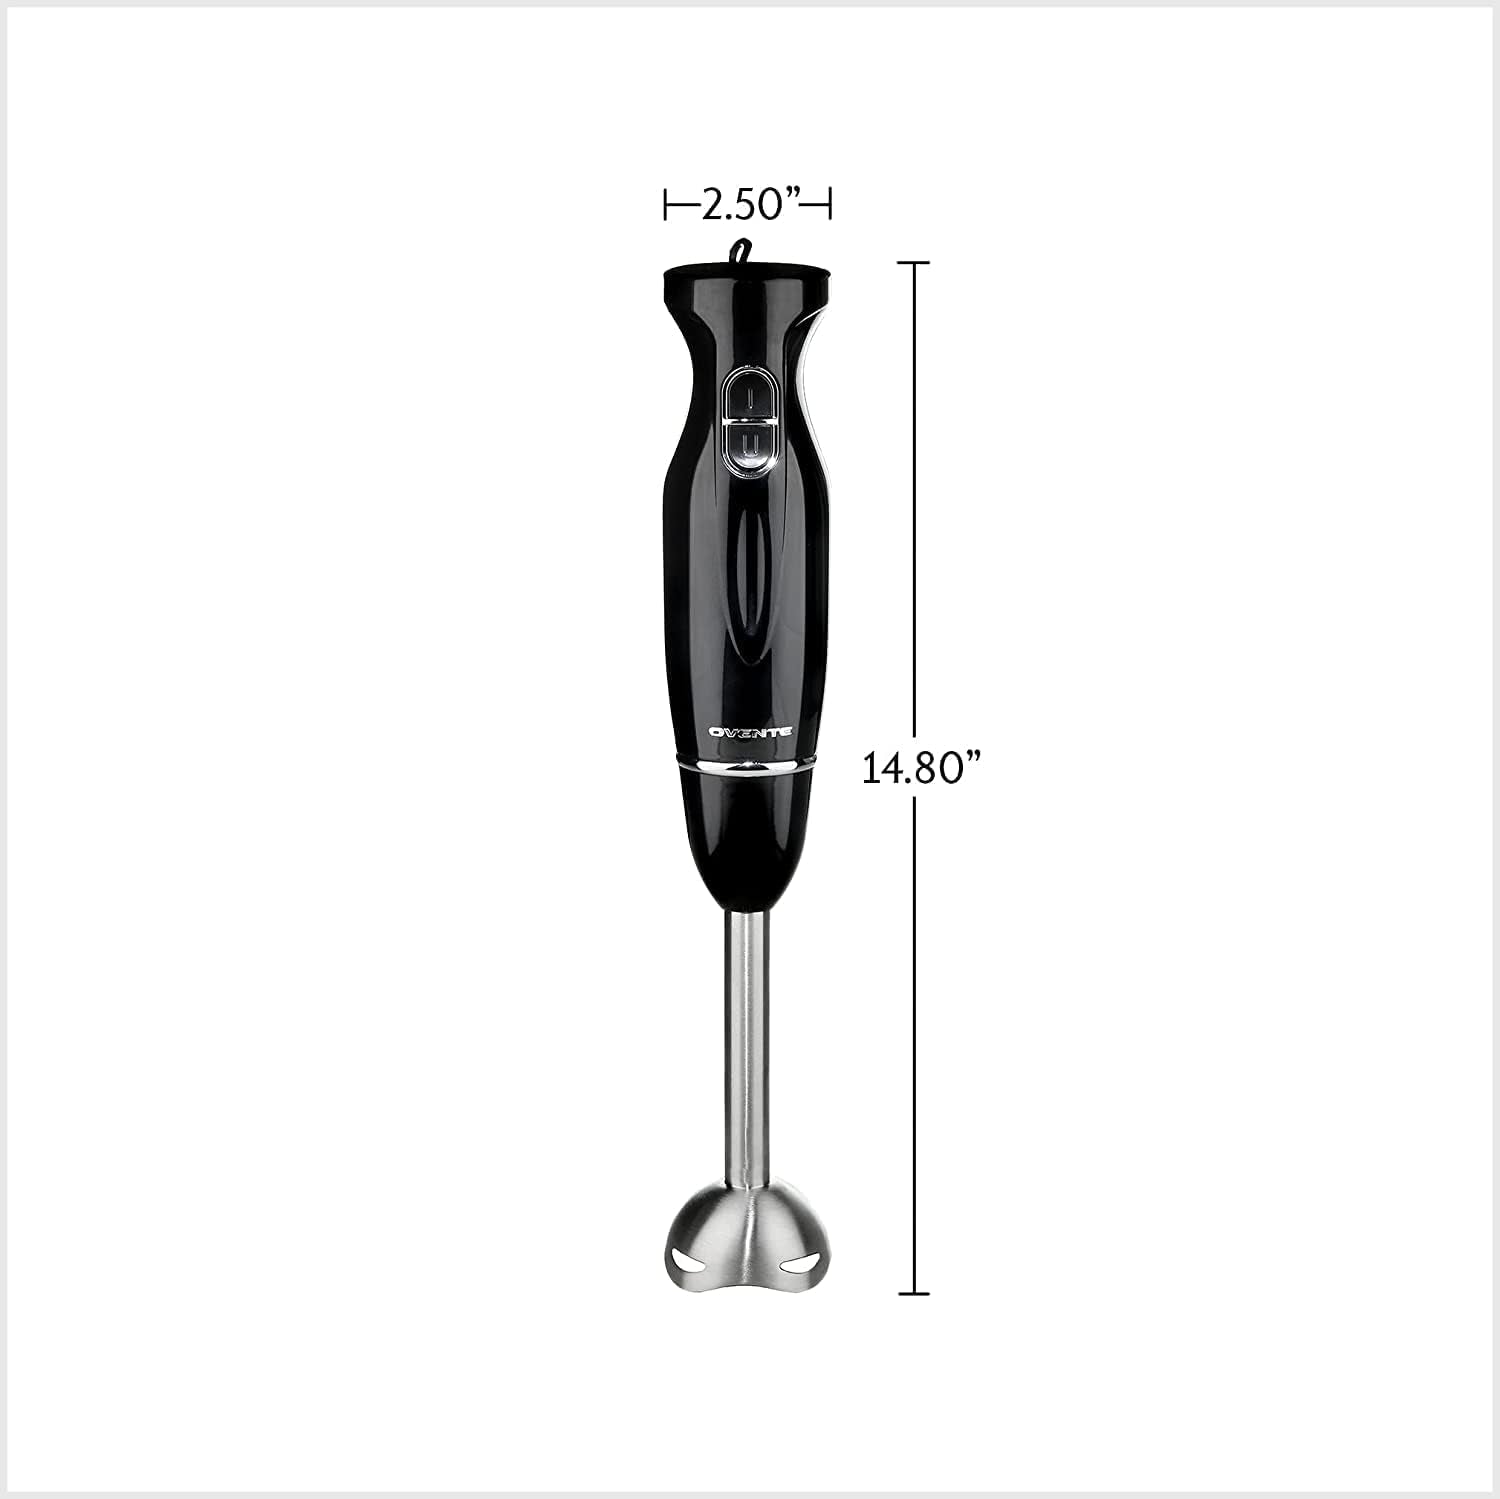 Electric Immersion Hand Blender 300 Watt 2 Mixing Speed with Stainless Steel Blades, Powerful Portable Easy Control Grip Stick Mixer Perfect for Smoothies, Puree Baby Food & Soup, Black HS560B